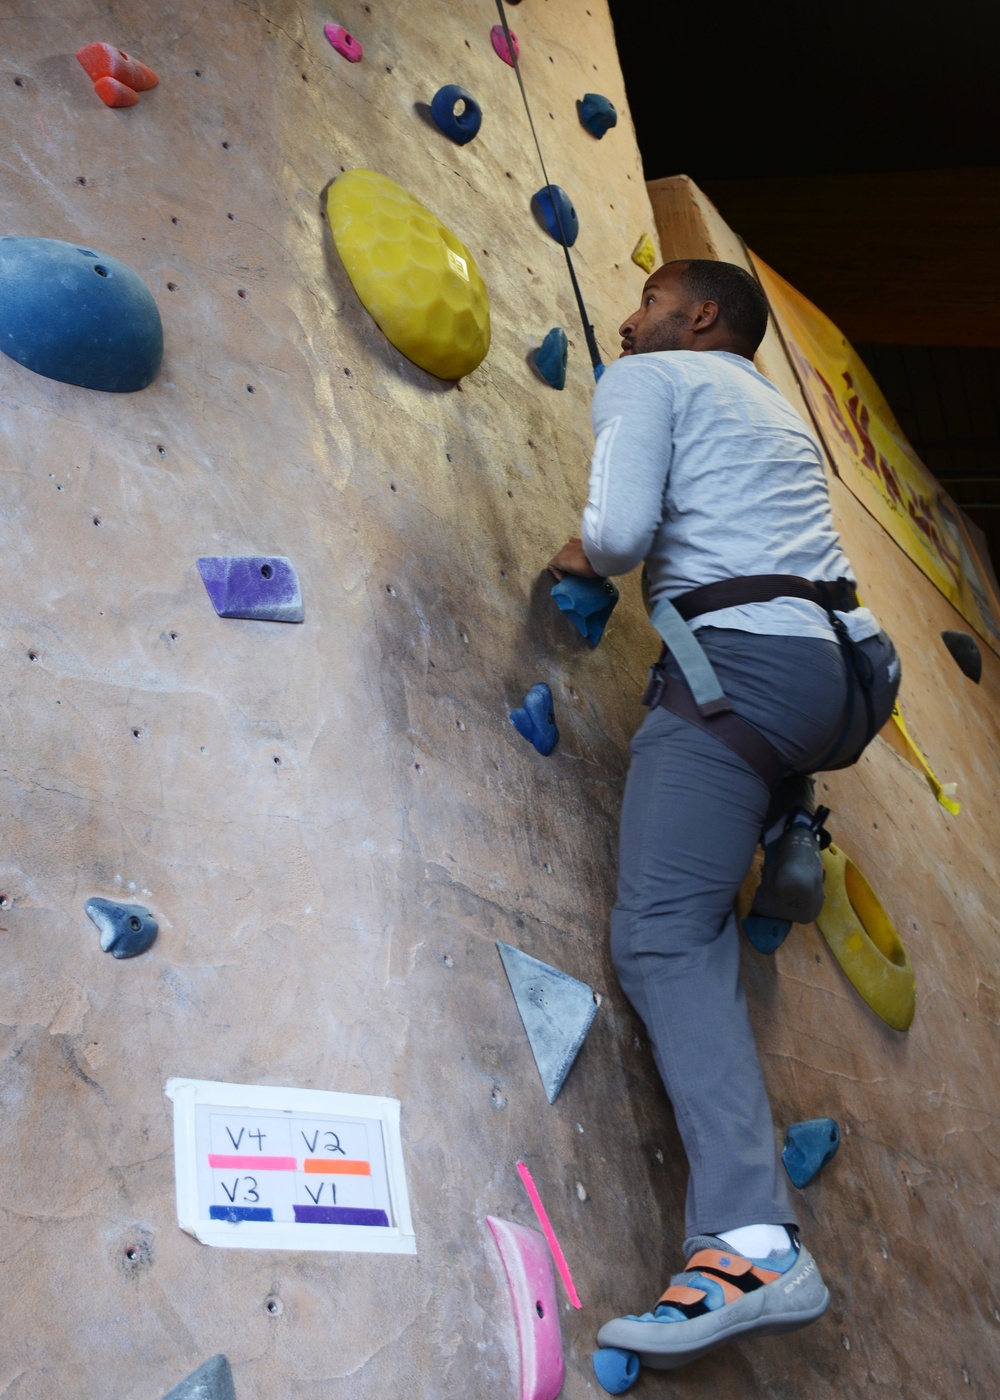 Rock climbing trip helps wounded warriors recover physically, emotionally